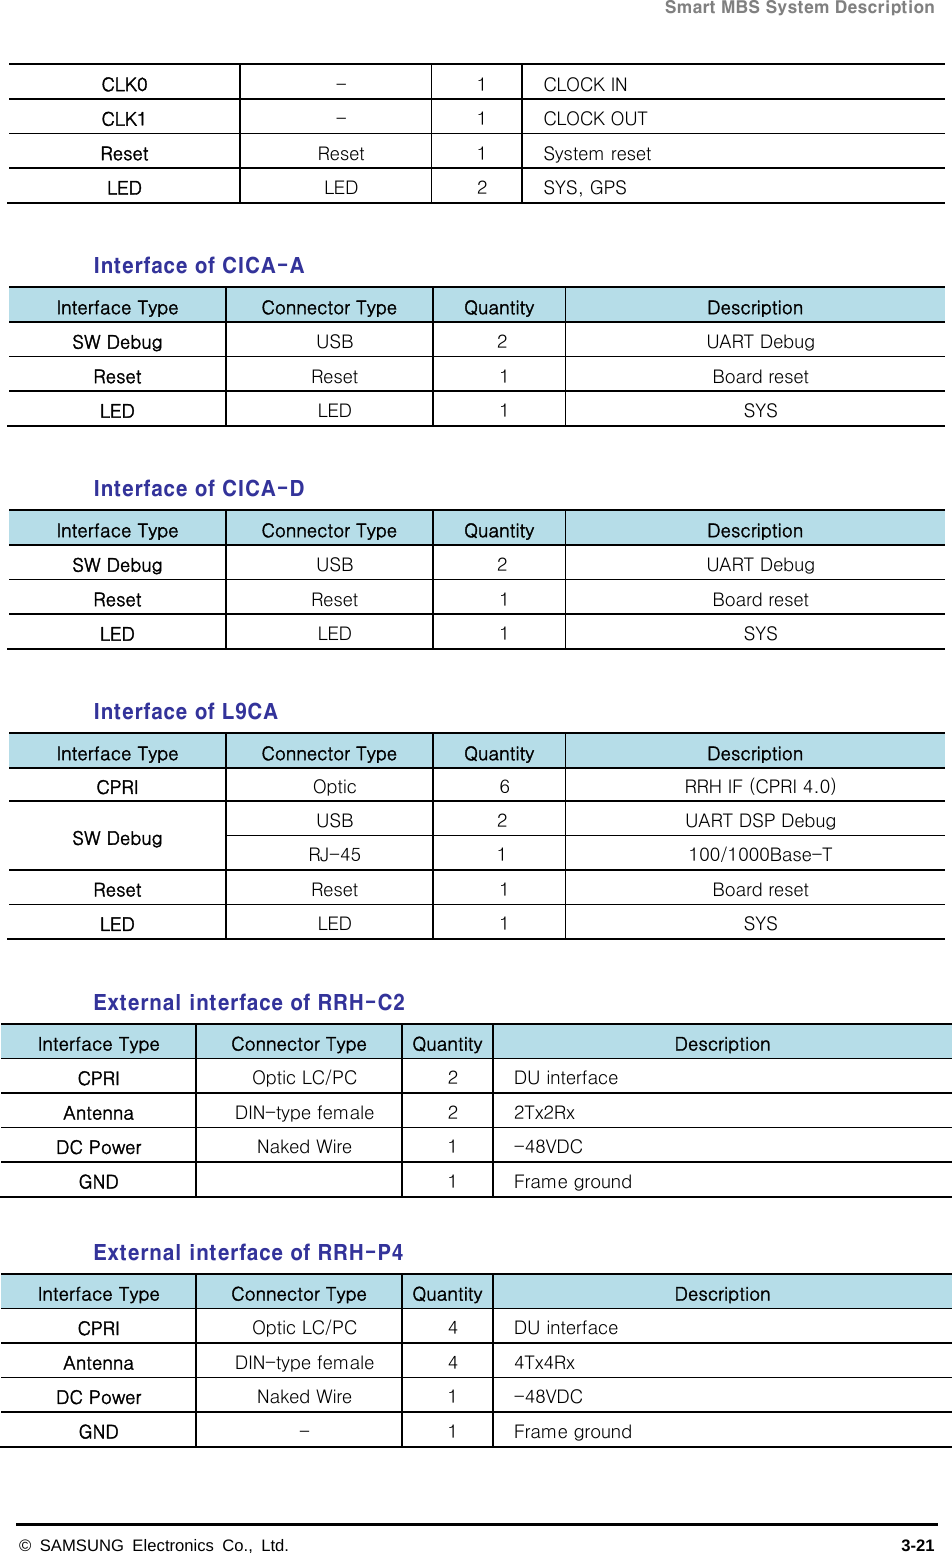  Smart MBS System Description © SAMSUNG Electronics Co., Ltd.  3-21 CLK0  -  1  CLOCK IN CLK1  -  1  CLOCK OUT Reset  Reset  1  System reset LED  LED  2  SYS, GPS  Interface of CICA-A Interface Type  Connector Type  Quantity  Description SW Debug    USB    2  UART Debug Reset    Reset    1  Board reset   LED    LED    1  SYS    Interface of CICA-D Interface Type  Connector Type  Quantity  Description SW Debug    USB    2  UART Debug Reset    Reset    1  Board reset   LED    LED    1  SYS    Interface of L9CA Interface Type  Connector Type  Quantity  Description CPRI Optic  6  RRH IF (CPRI 4.0) SW Debug    USB    2  UART DSP Debug RJ-45  1  100/1000Base-T Reset    Reset    1  Board reset   LED    LED    1  SYS    External interface of RRH-C2 Interface Type  Connector Type  Quantity Description CPRI  Optic LC/PC  2  DU interface Antenna  DIN-type female  2  2Tx2Rx DC Power  Naked Wire  1  -48VDC GND   1  Frame ground  External interface of RRH-P4 Interface Type  Connector Type  Quantity Description CPRI  Optic LC/PC  4  DU interface Antenna  DIN-type female  4  4Tx4Rx DC Power  Naked Wire  1  -48VDC GND  -  1  Frame ground 